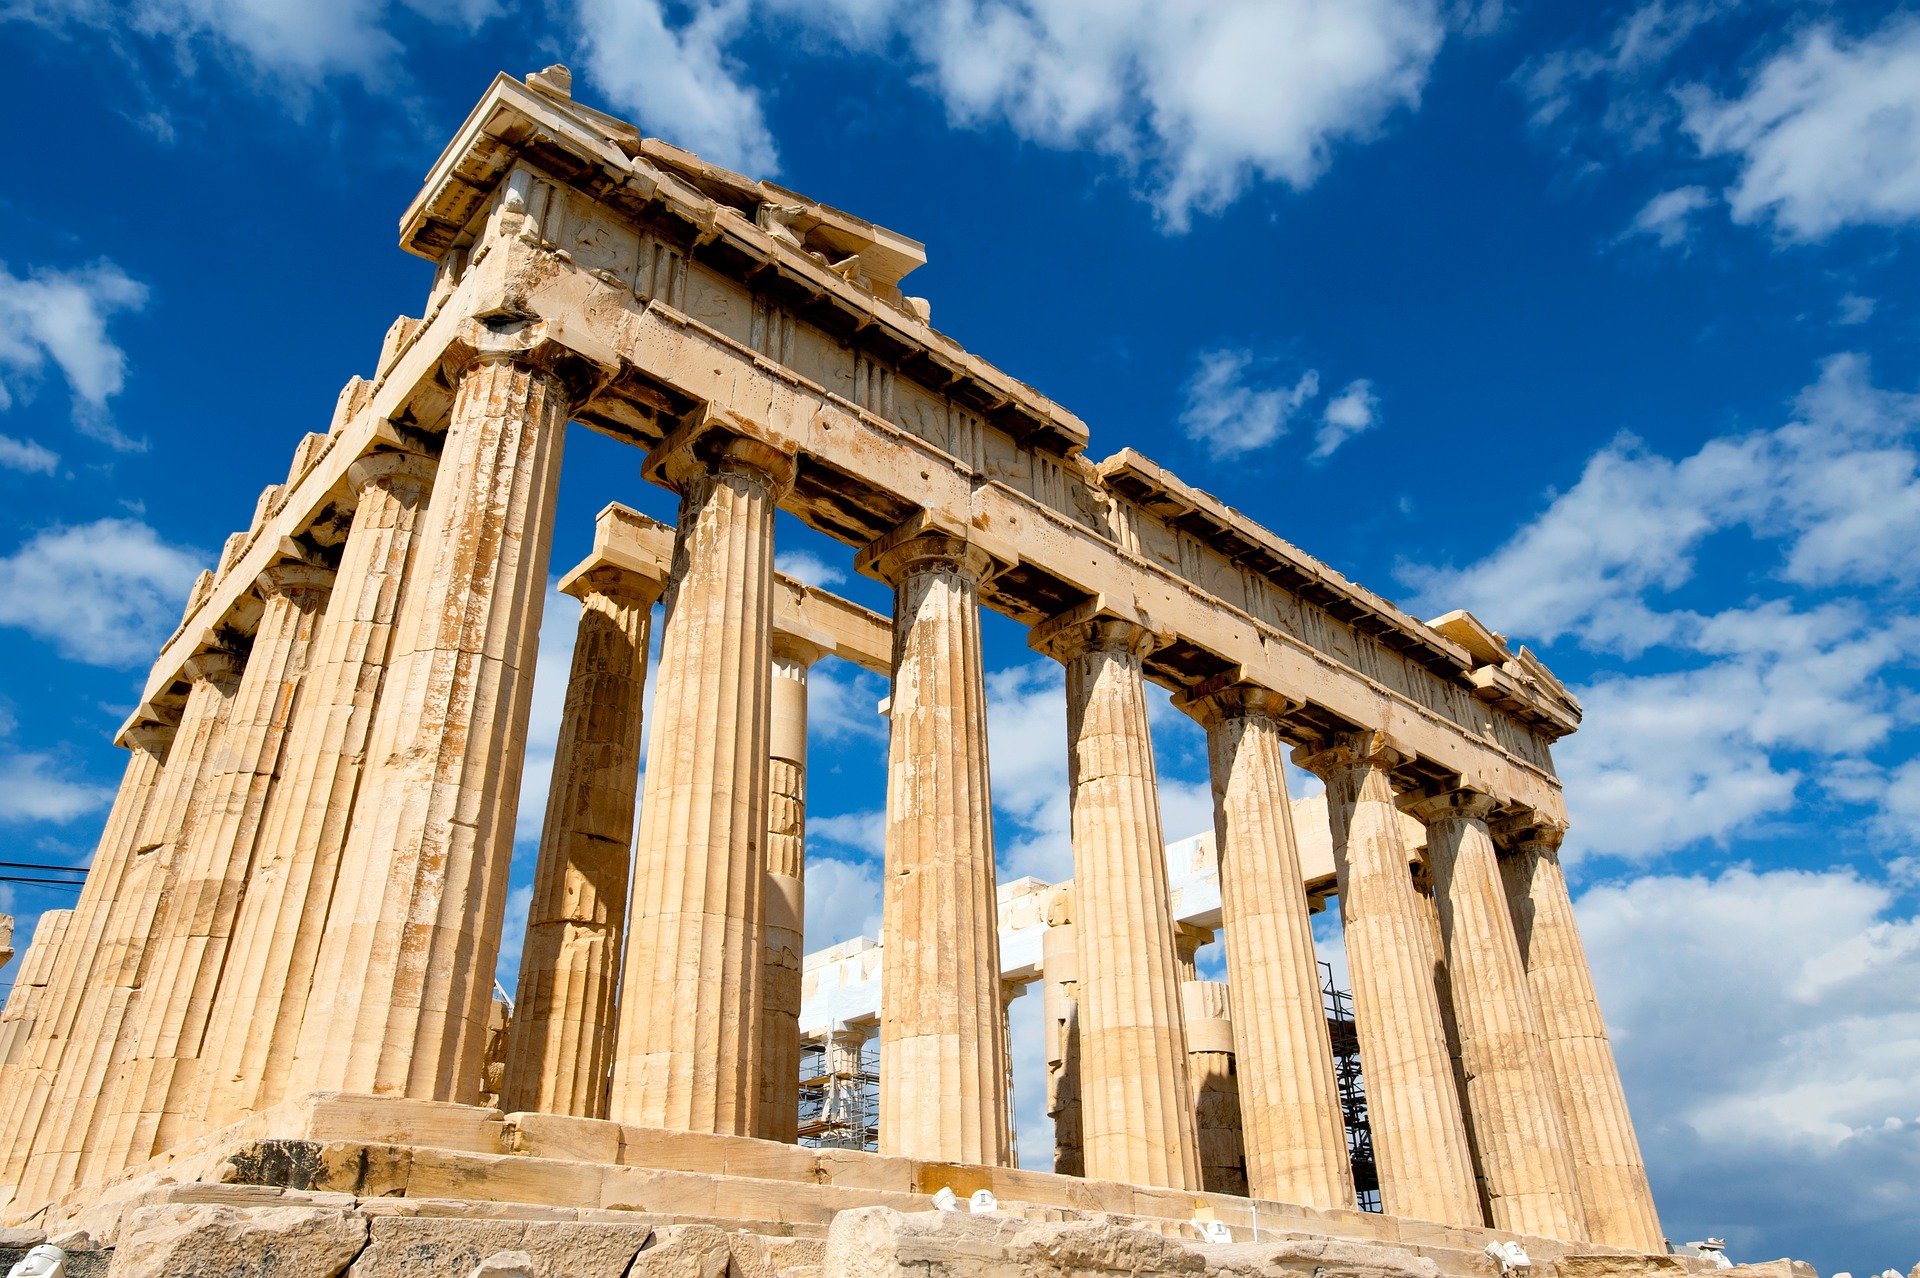 Historical And Cultural Tours Of Greece - Exploring Greece's Rich History